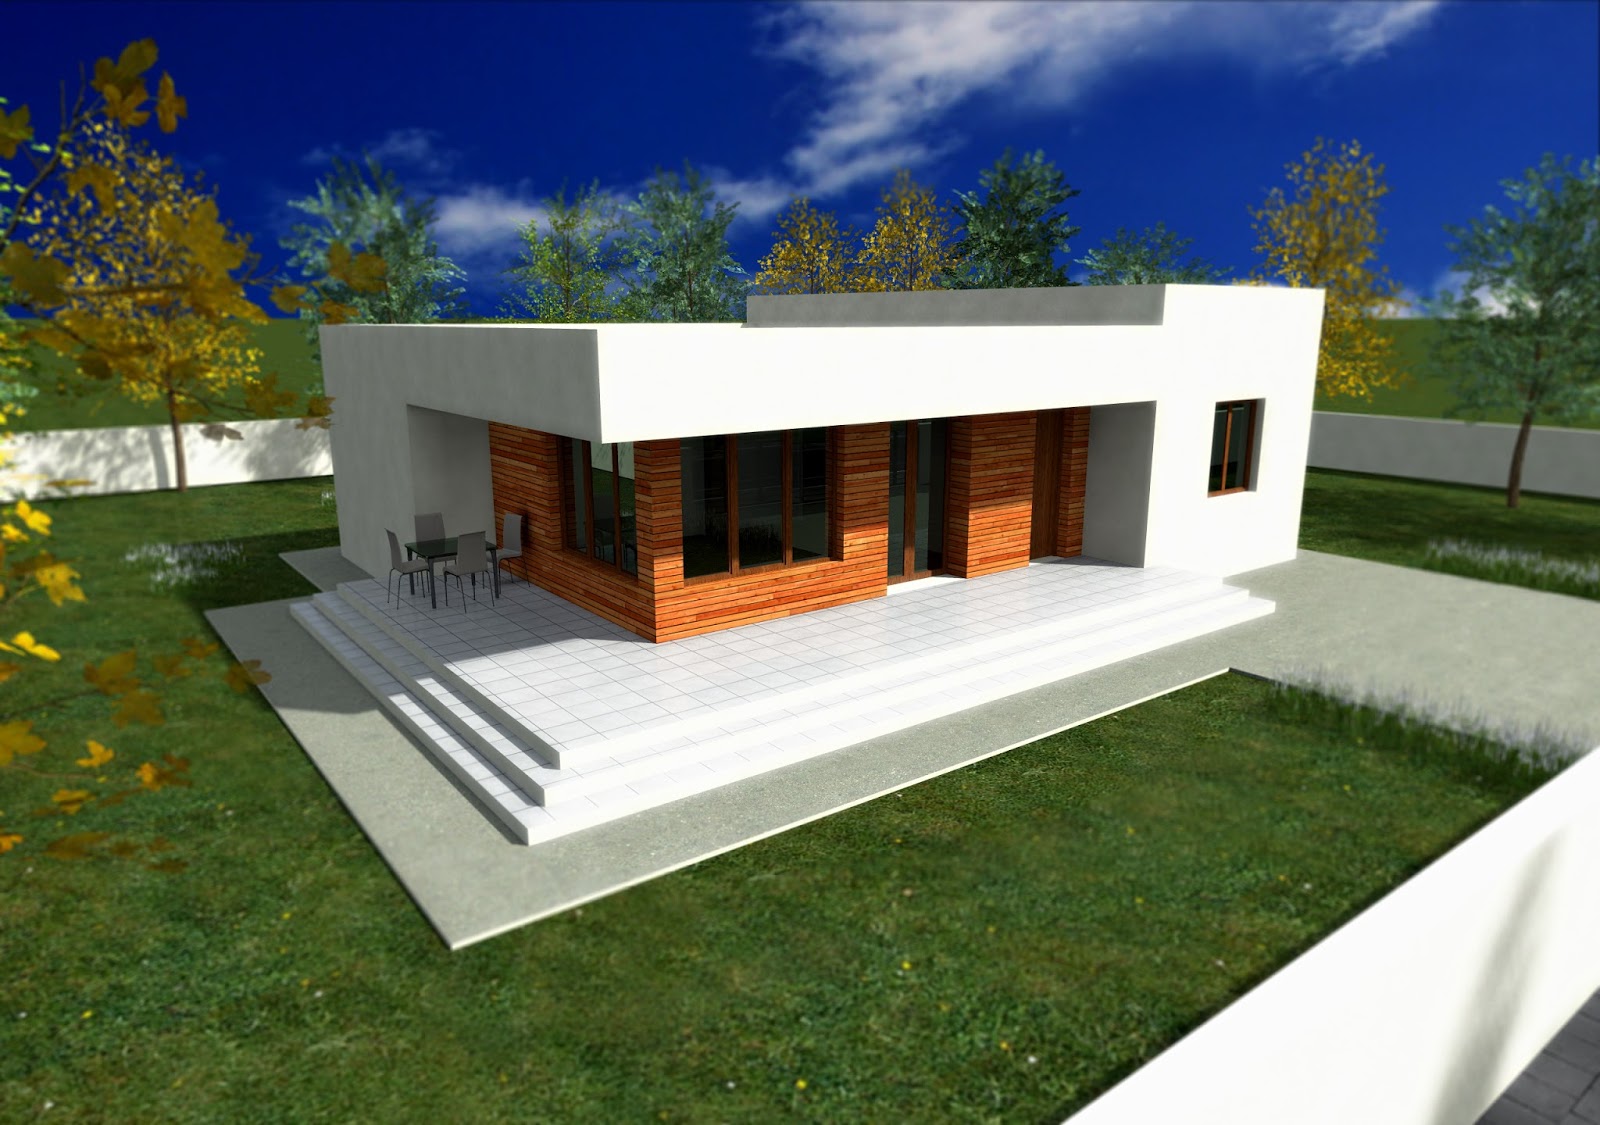 Building a new house is a journey of finding who you are, what you want, how you want to live and where you want to be. Building your dream house can be one of the most thrilling and fulfilling plans you can manage.If you don't have a house plan, here are some free house plans and design ideas to get started building your own.